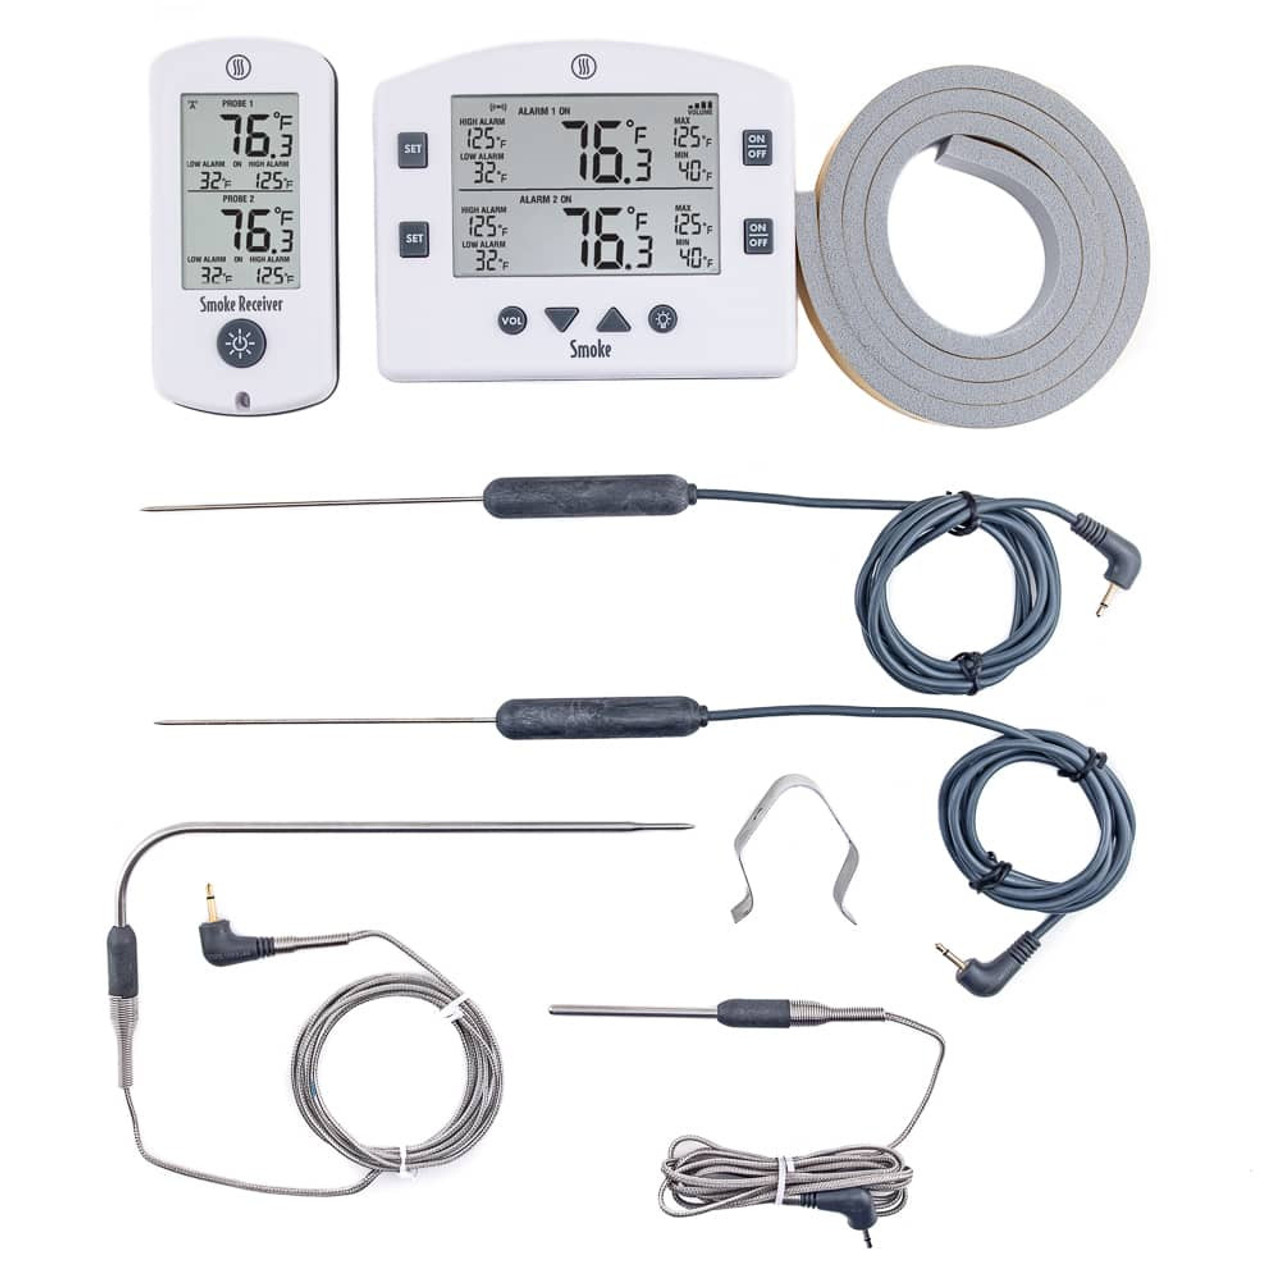 ThermoWorks Smoke Remote Duel Probe Thermometer